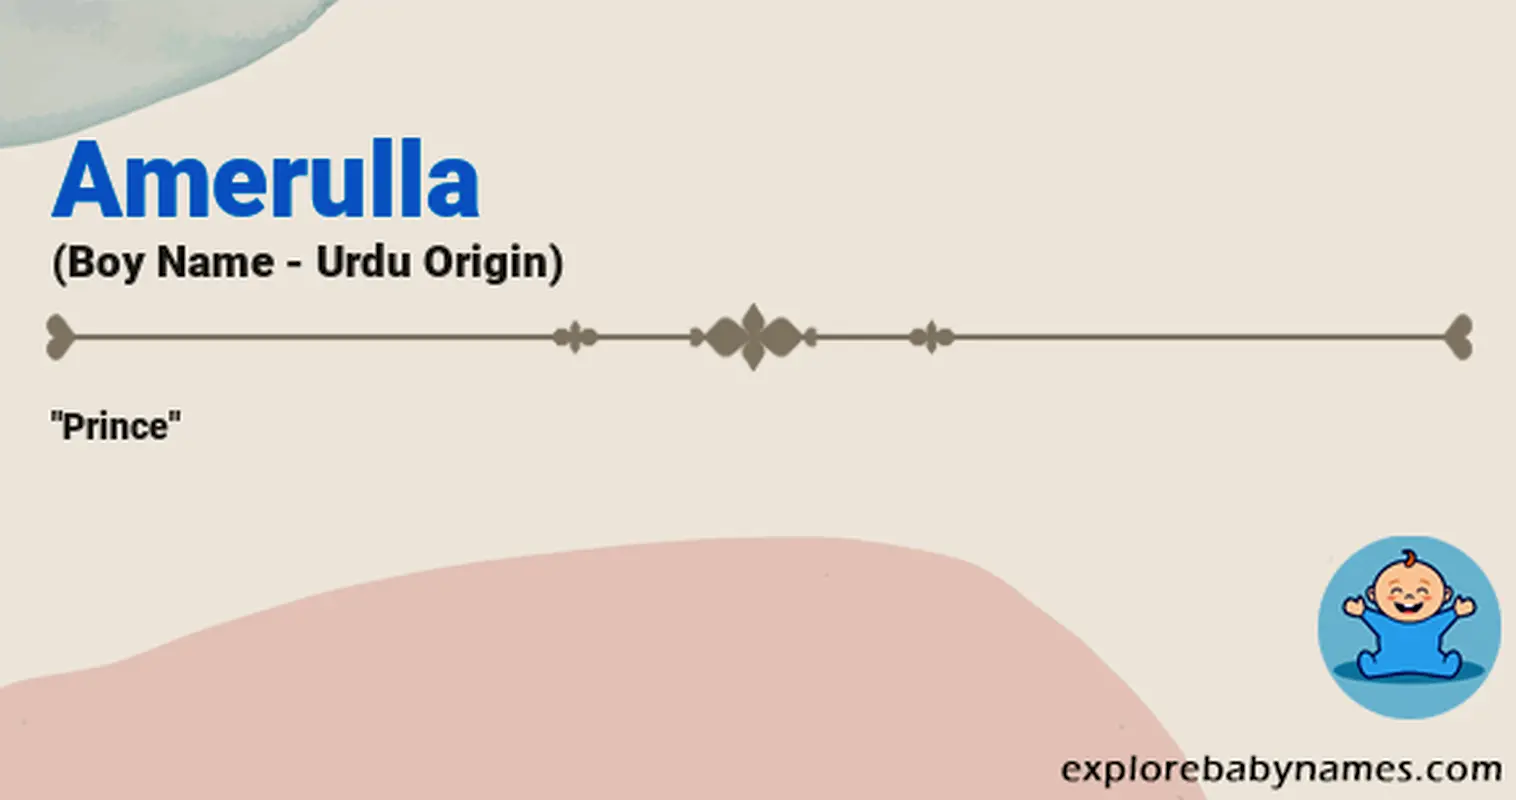 Meaning of Amerulla